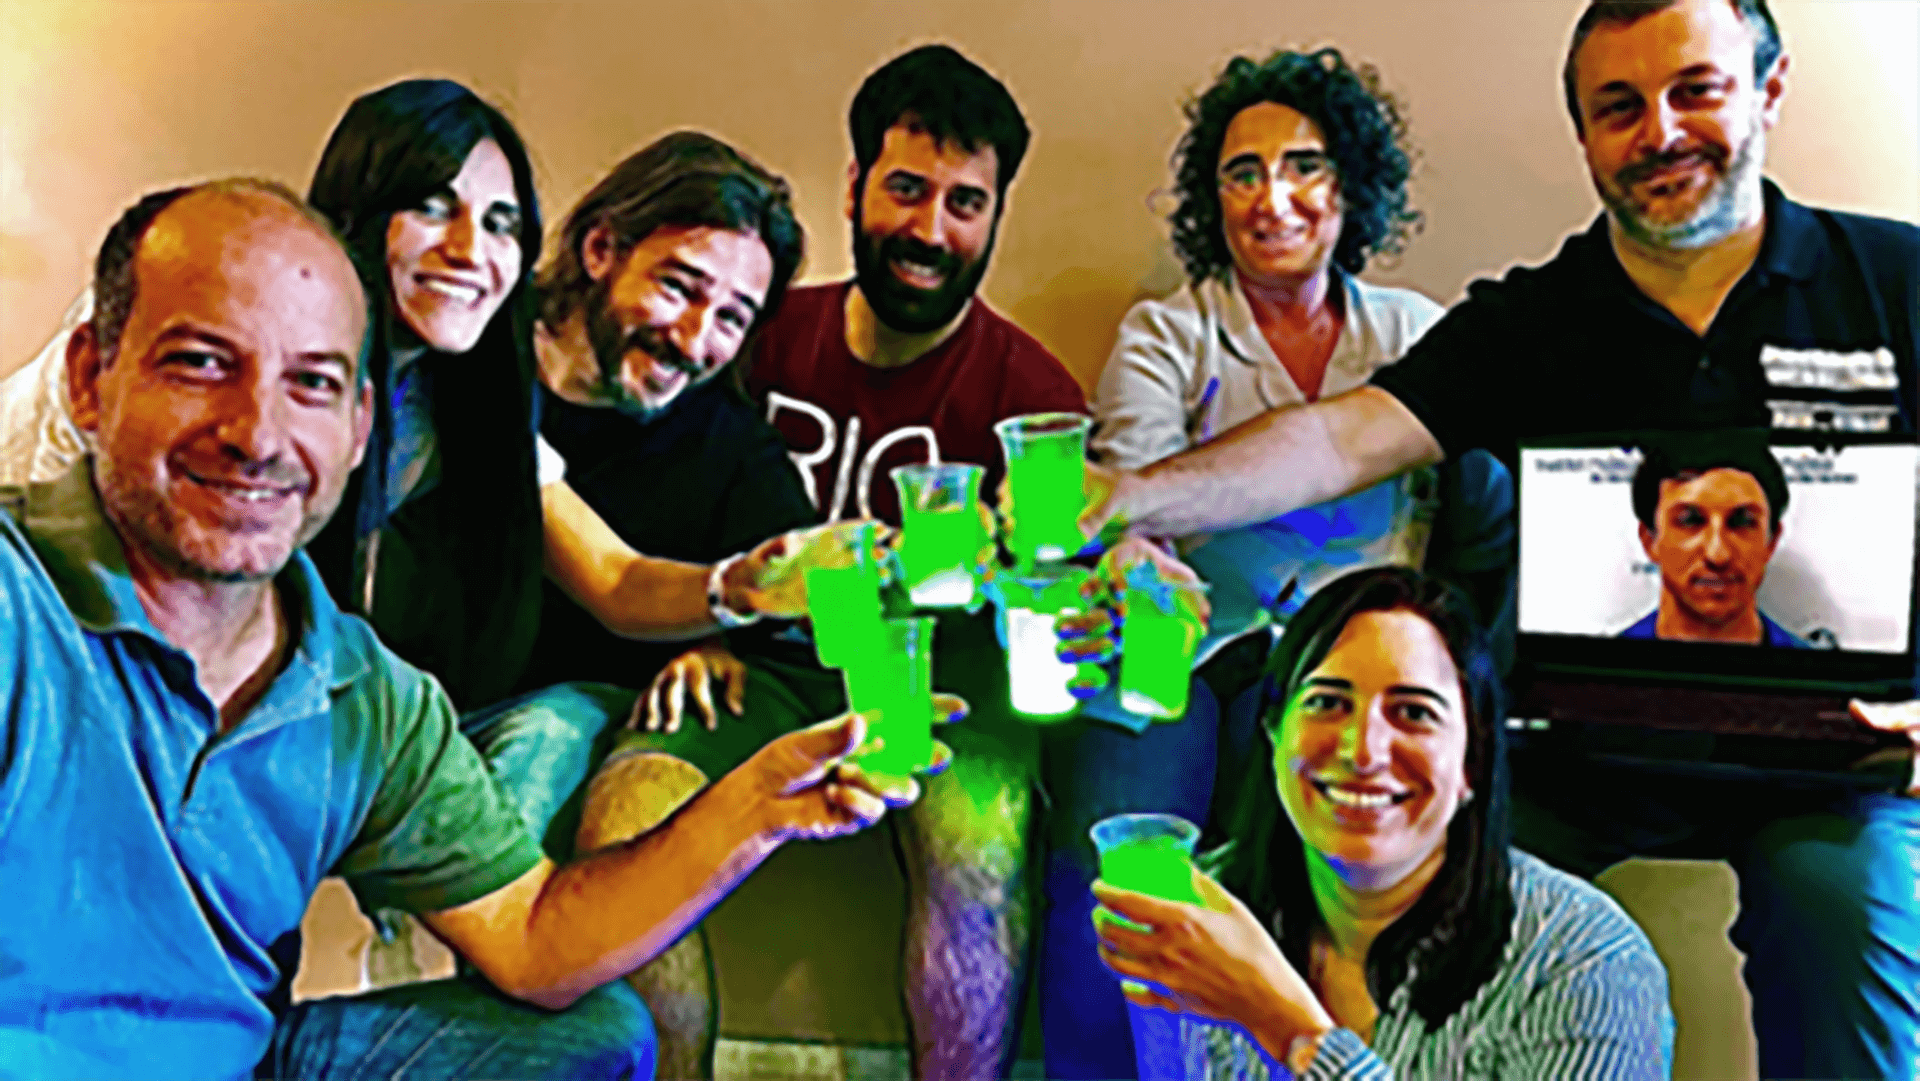 A group of people smile for a photo while toasting with bright green drinks.